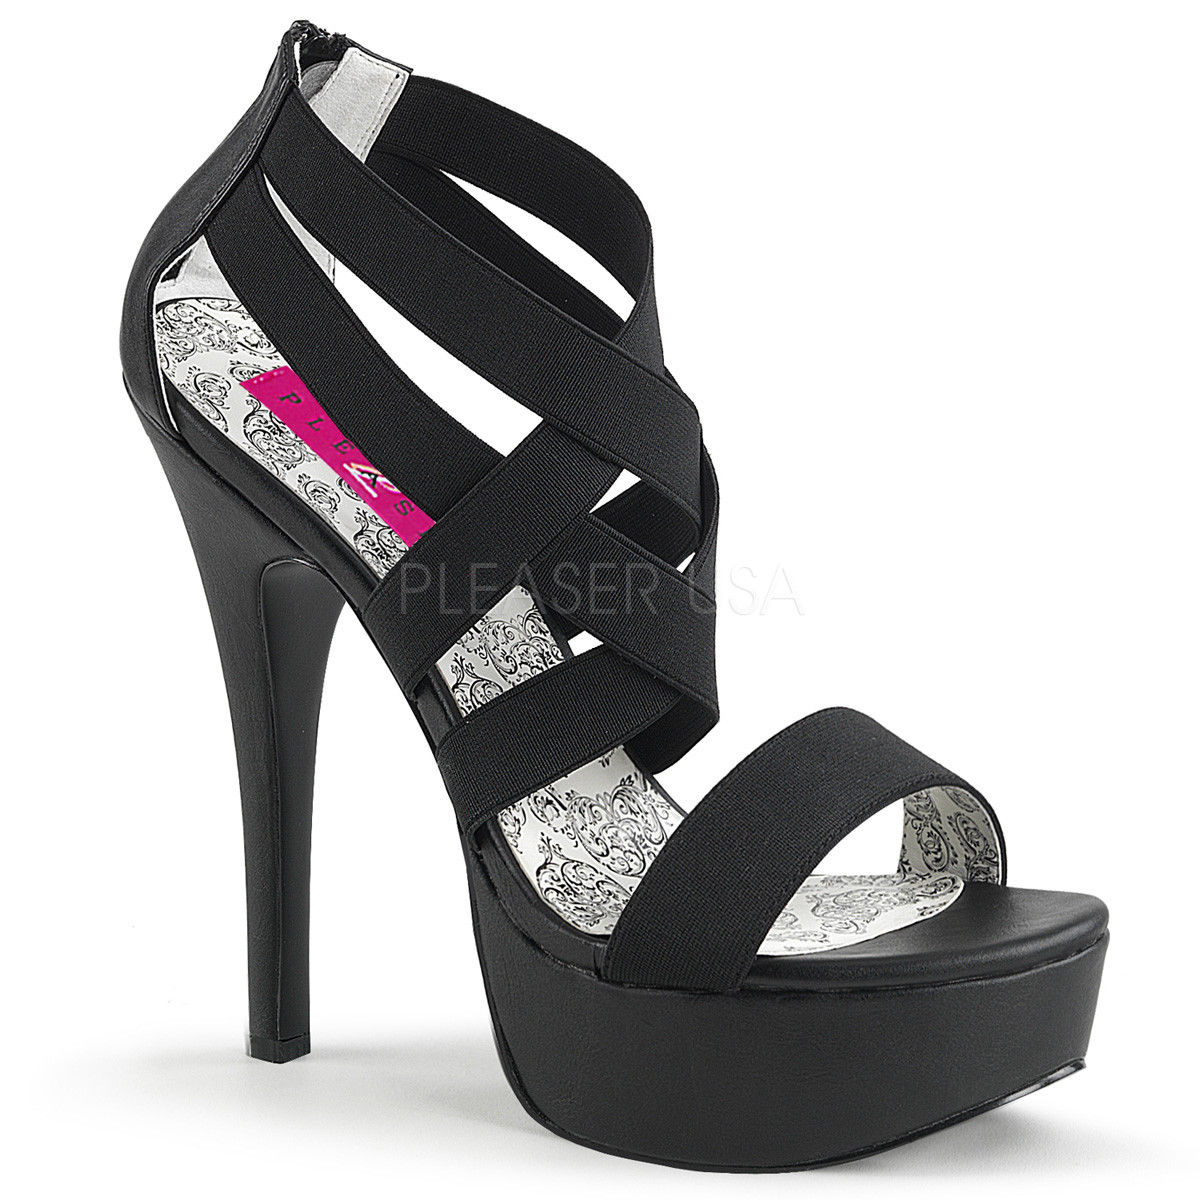 PLEASER PINK LABEL Teeze-47W WIDE WIDTH Black Elastic Strappy Drag Size 10-15 - A Shoe Addiction